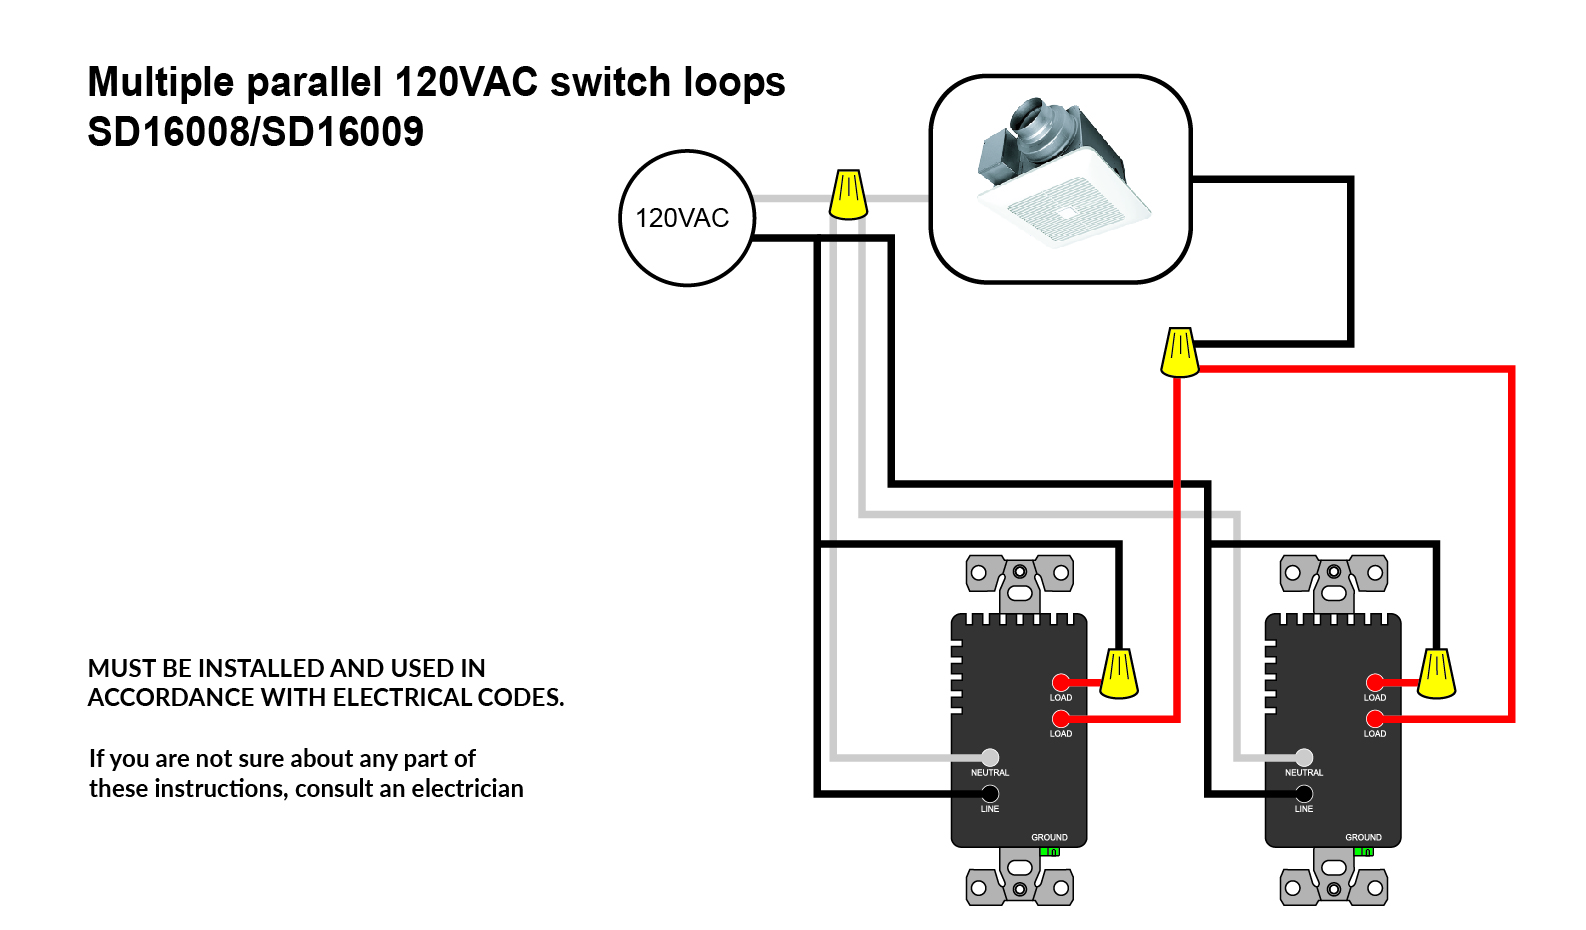 SD16008_SD16009-Multiple_parallel_120VAC_switch_loops.jpg